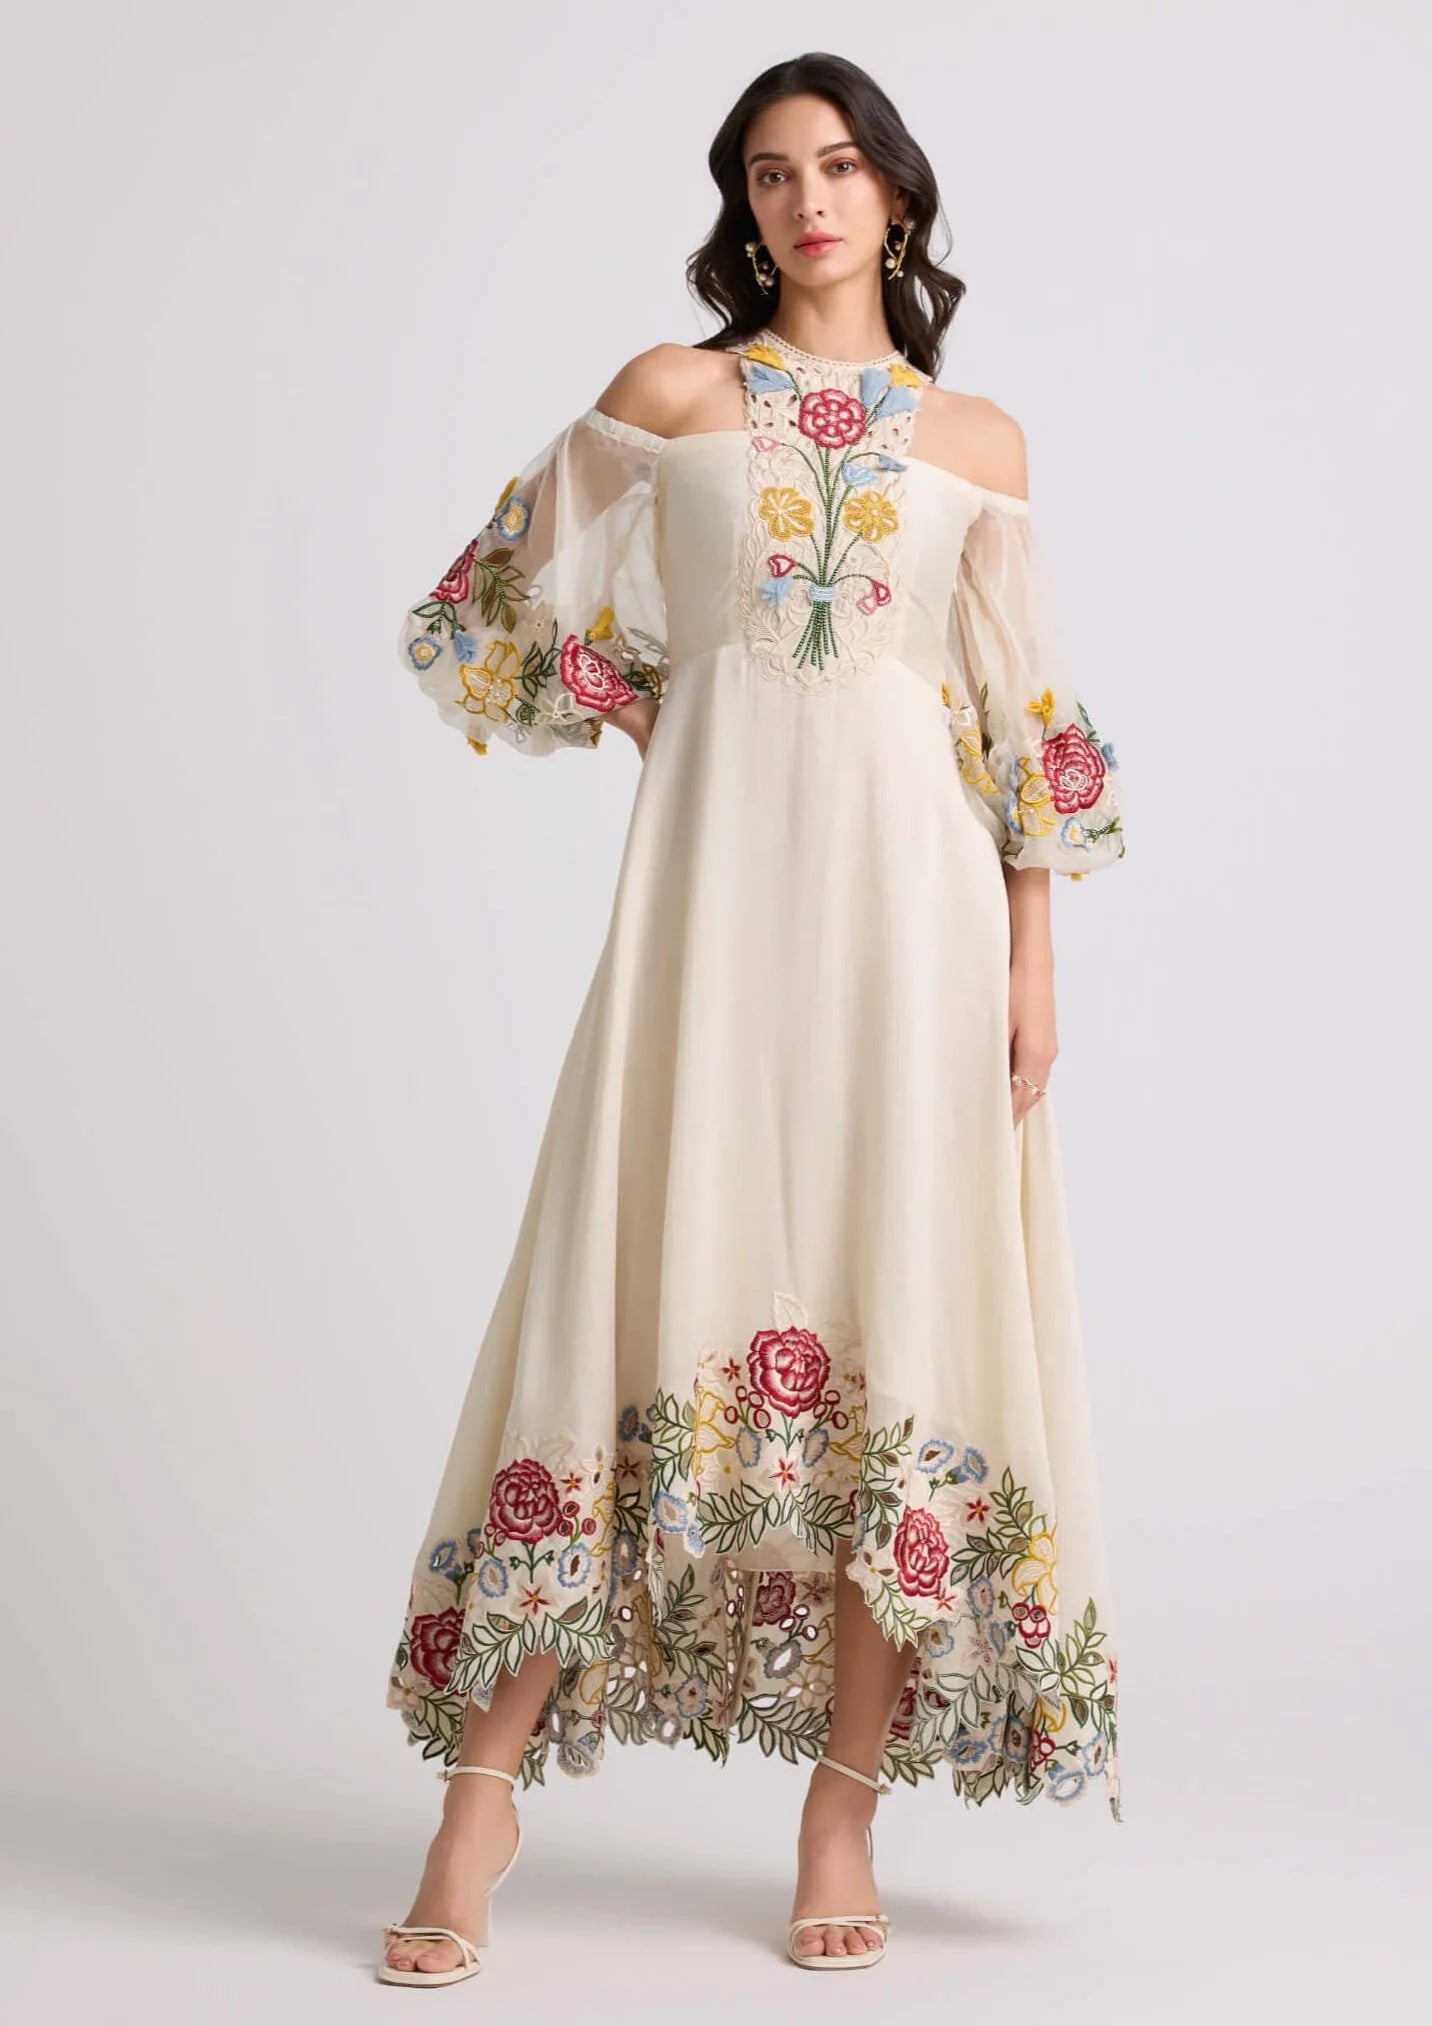 Ivory 3D Floral Applique And Threadwork Dress